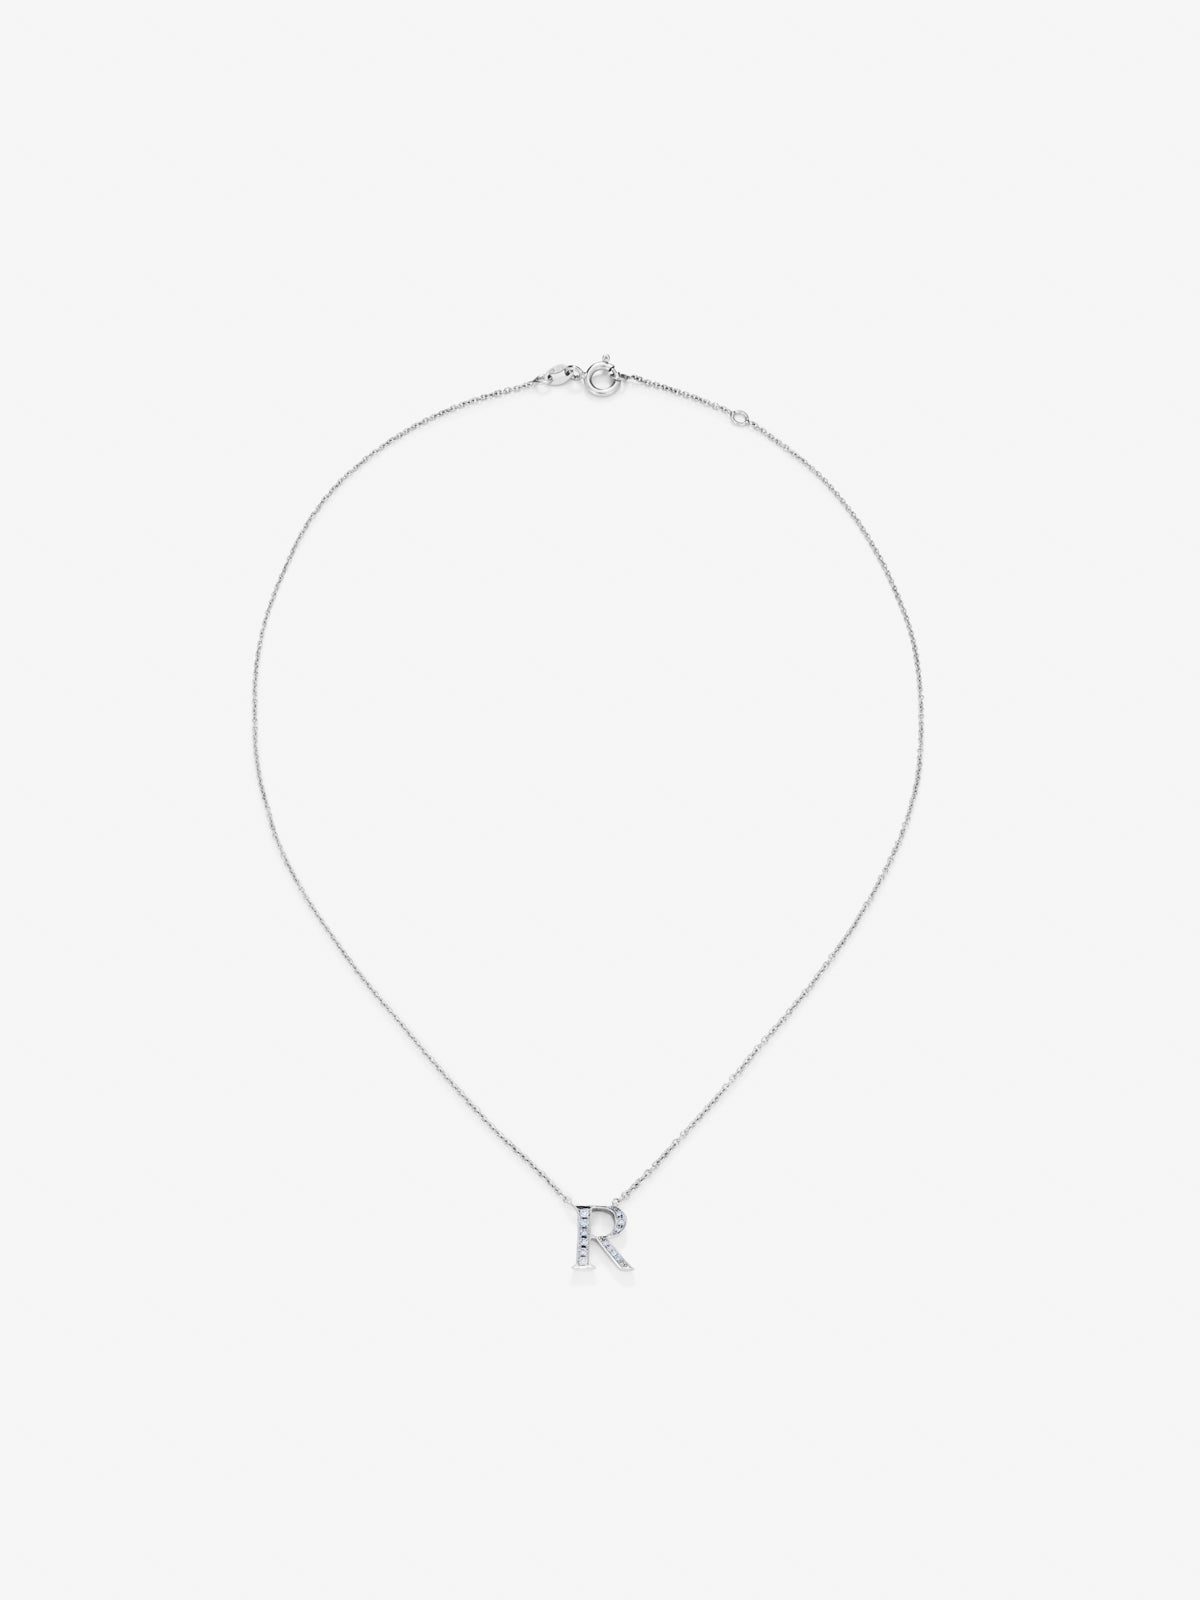 18K white gold pendant with letter R and 14 brilliant-cut diamonds with a total of 0.07 cts